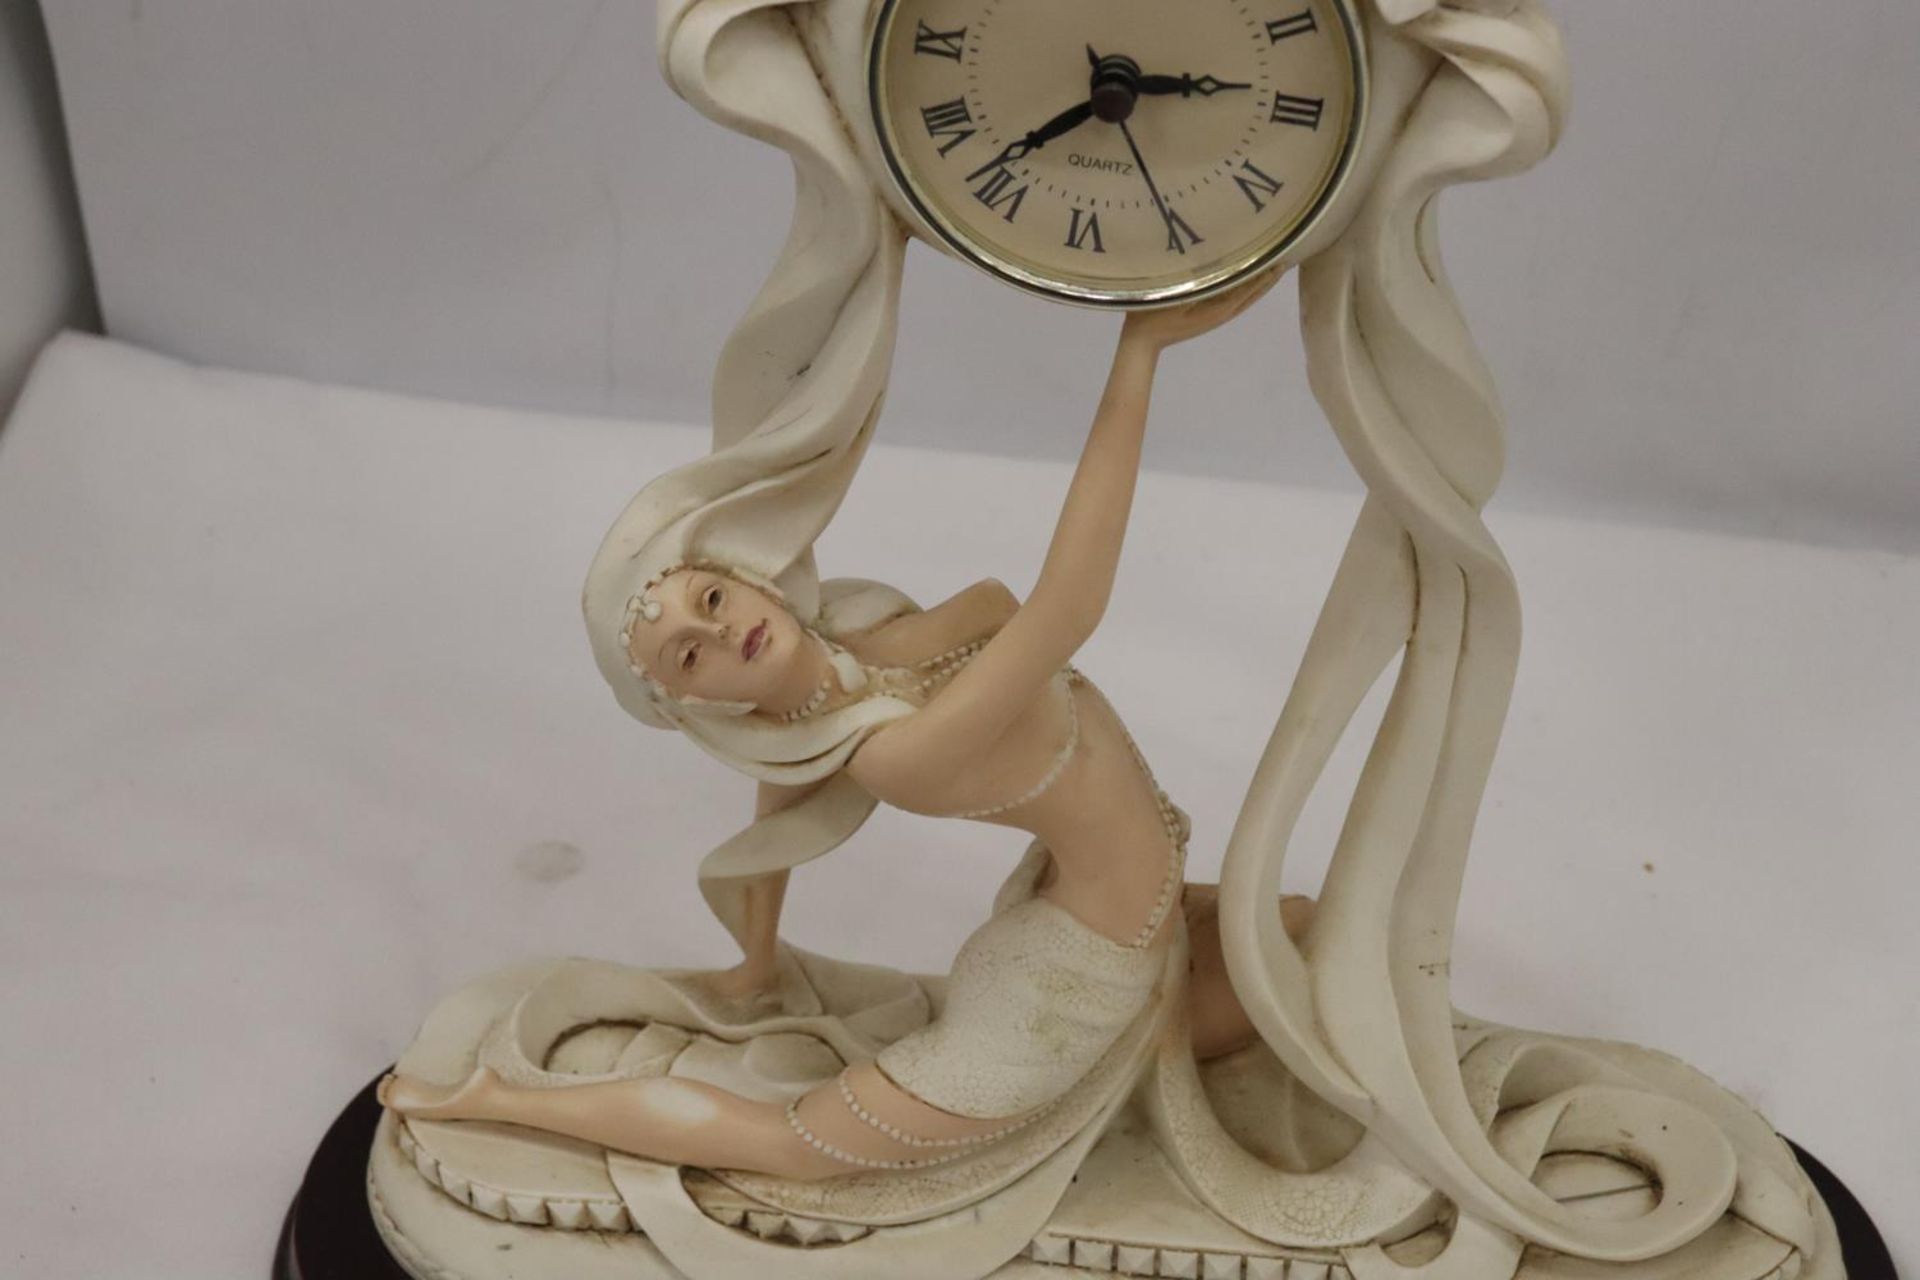 AN ART DECO STYLE MANTLE CLOCK WITH A LADY FIGURINE, HEIGHT 36CM - Image 7 of 7